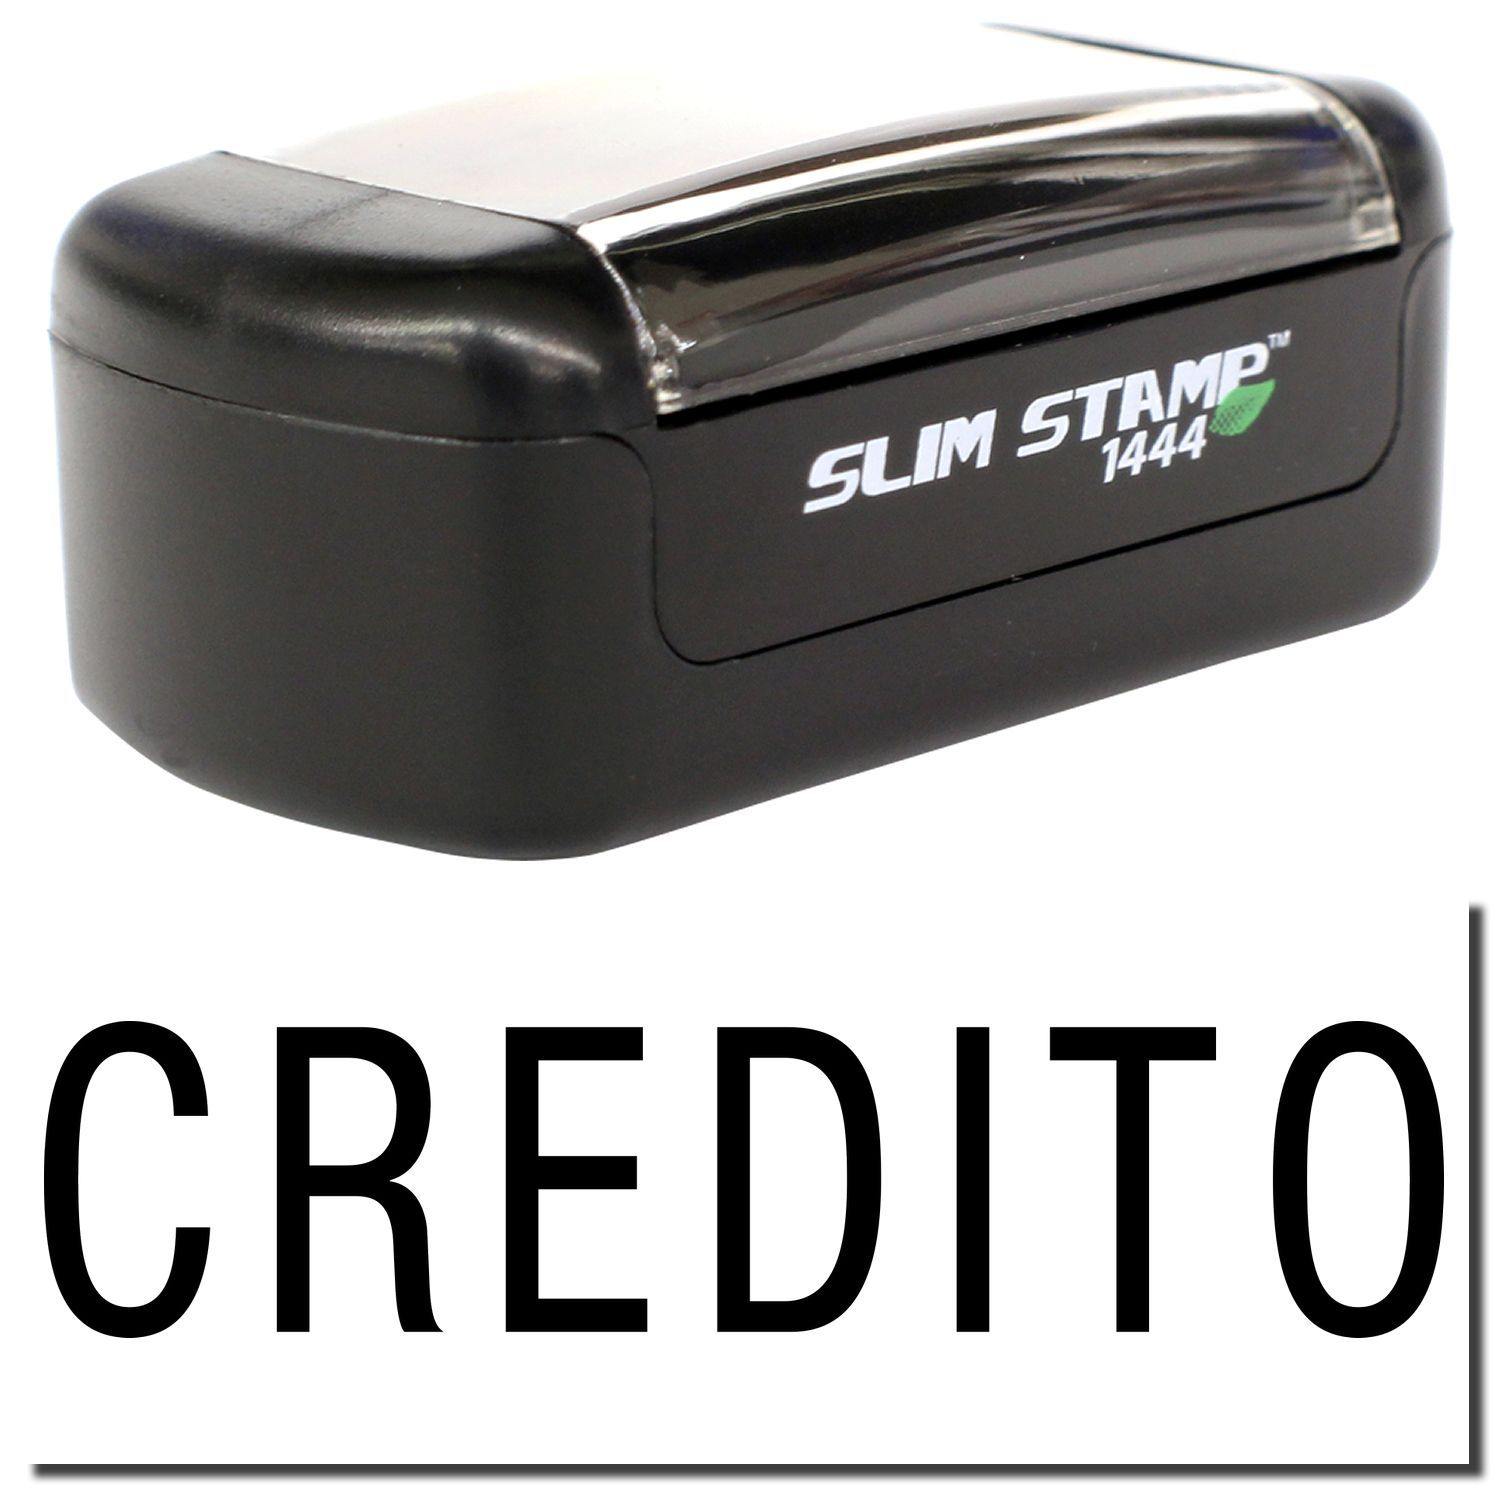 A stock office pre-inked stamp with a stamped image showing how the text "CREDITO" is displayed after stamping.